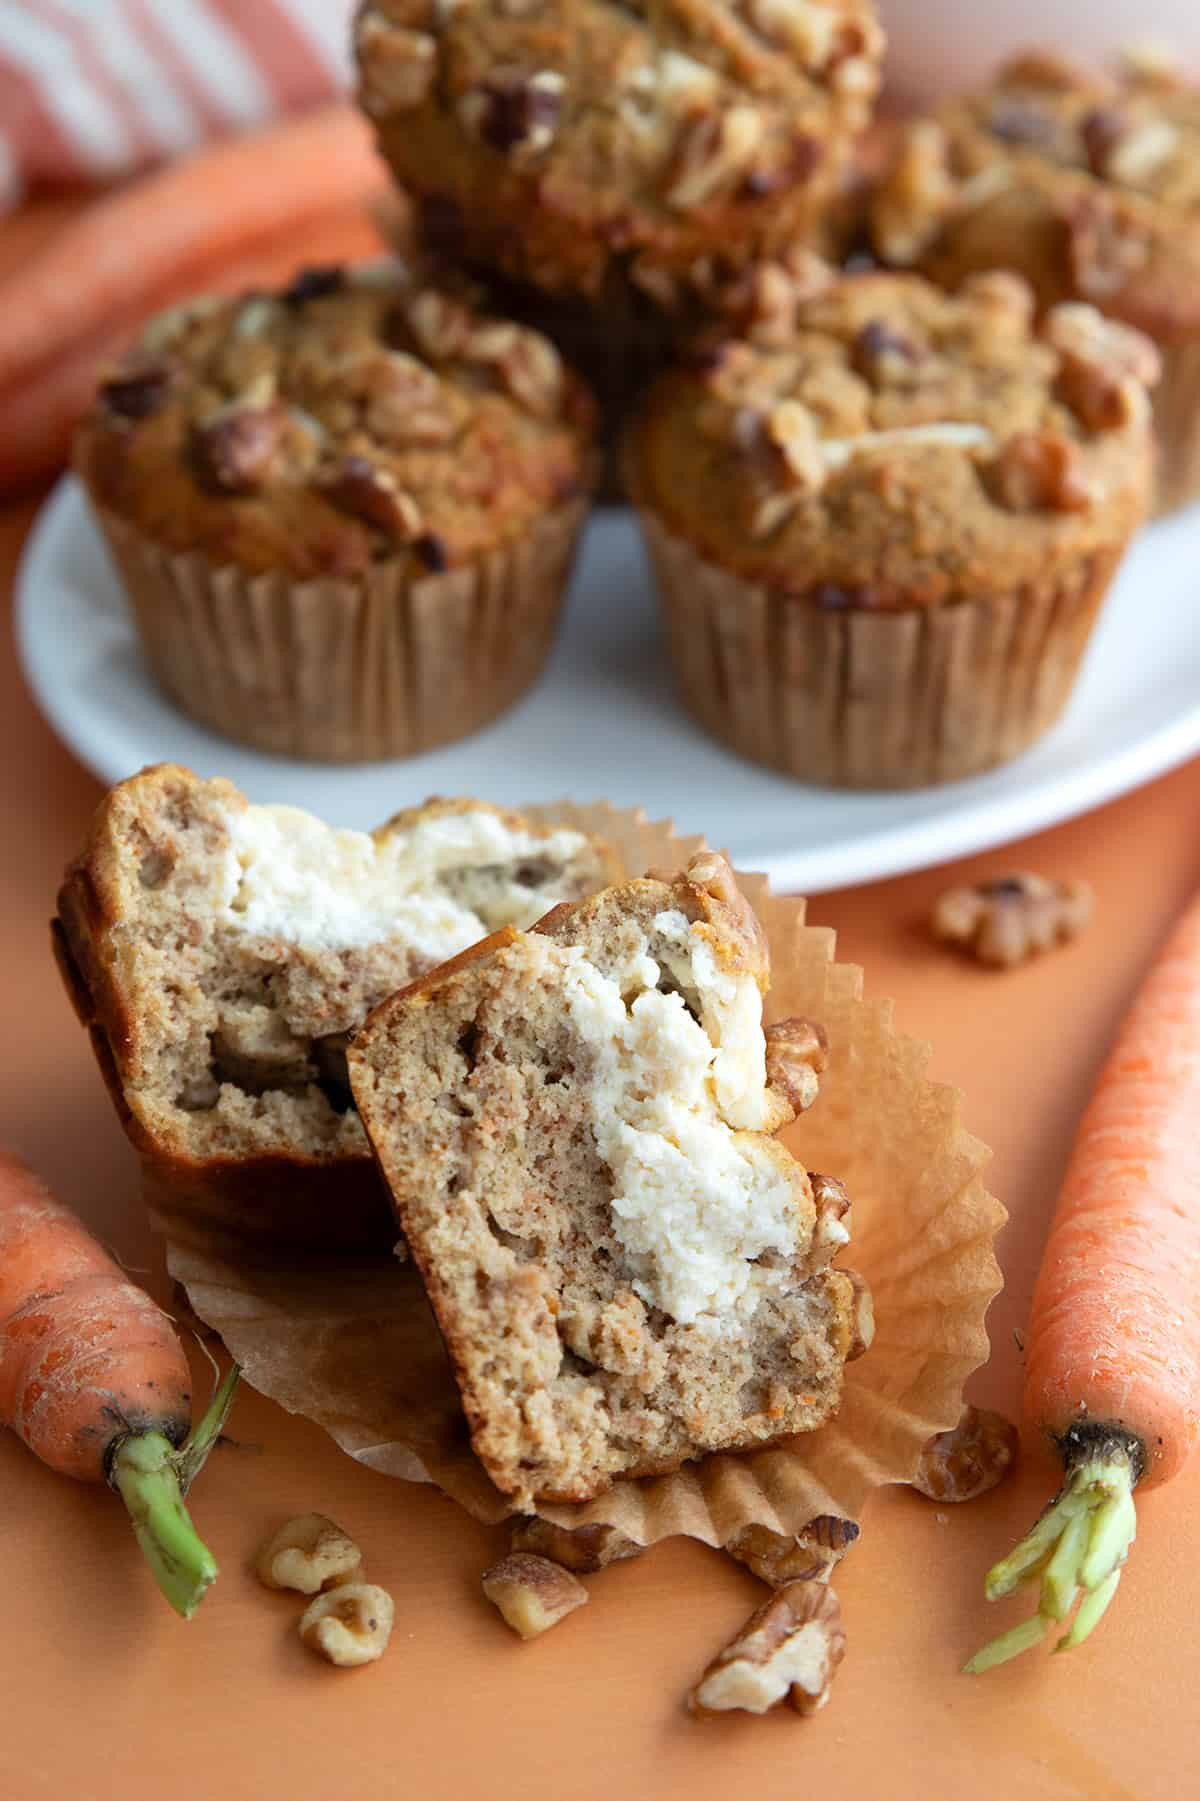 A keto carrot cake muffin split open in front of a plate of more muffins, with carrots and walnuts strewn around.